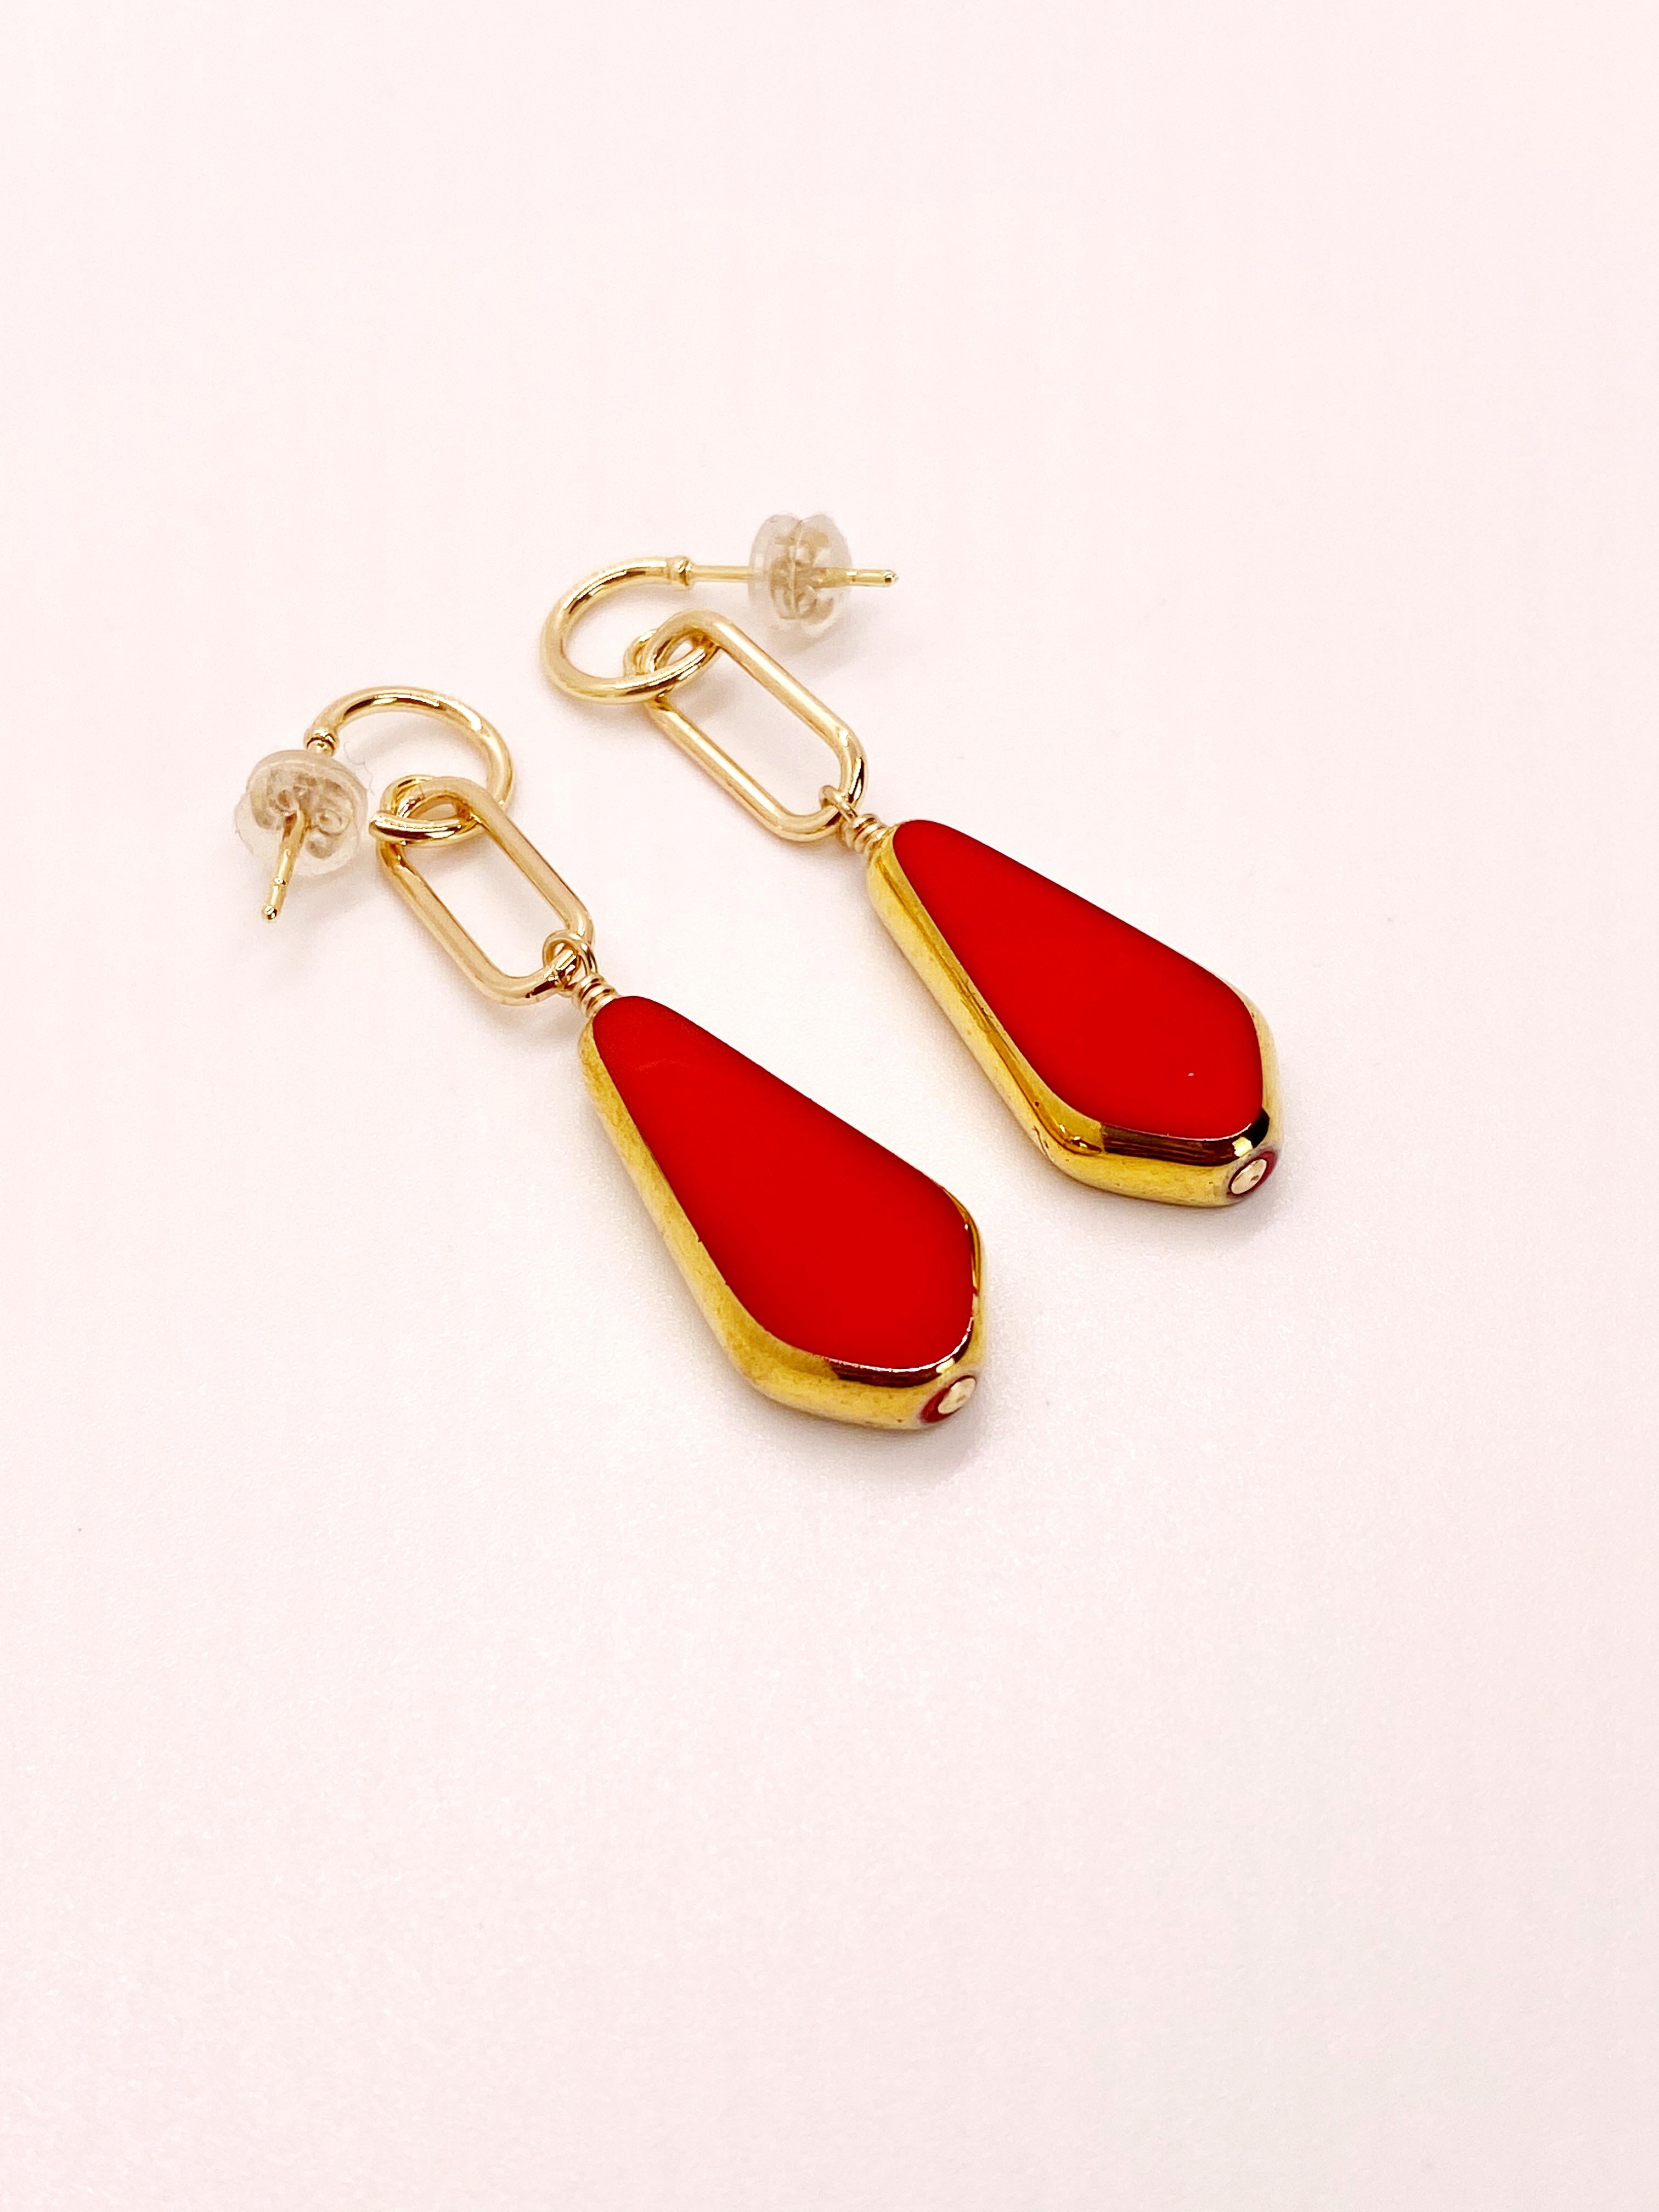 Retro Red Vintage German Glass Beads edged with 24K gold Kite Earrings